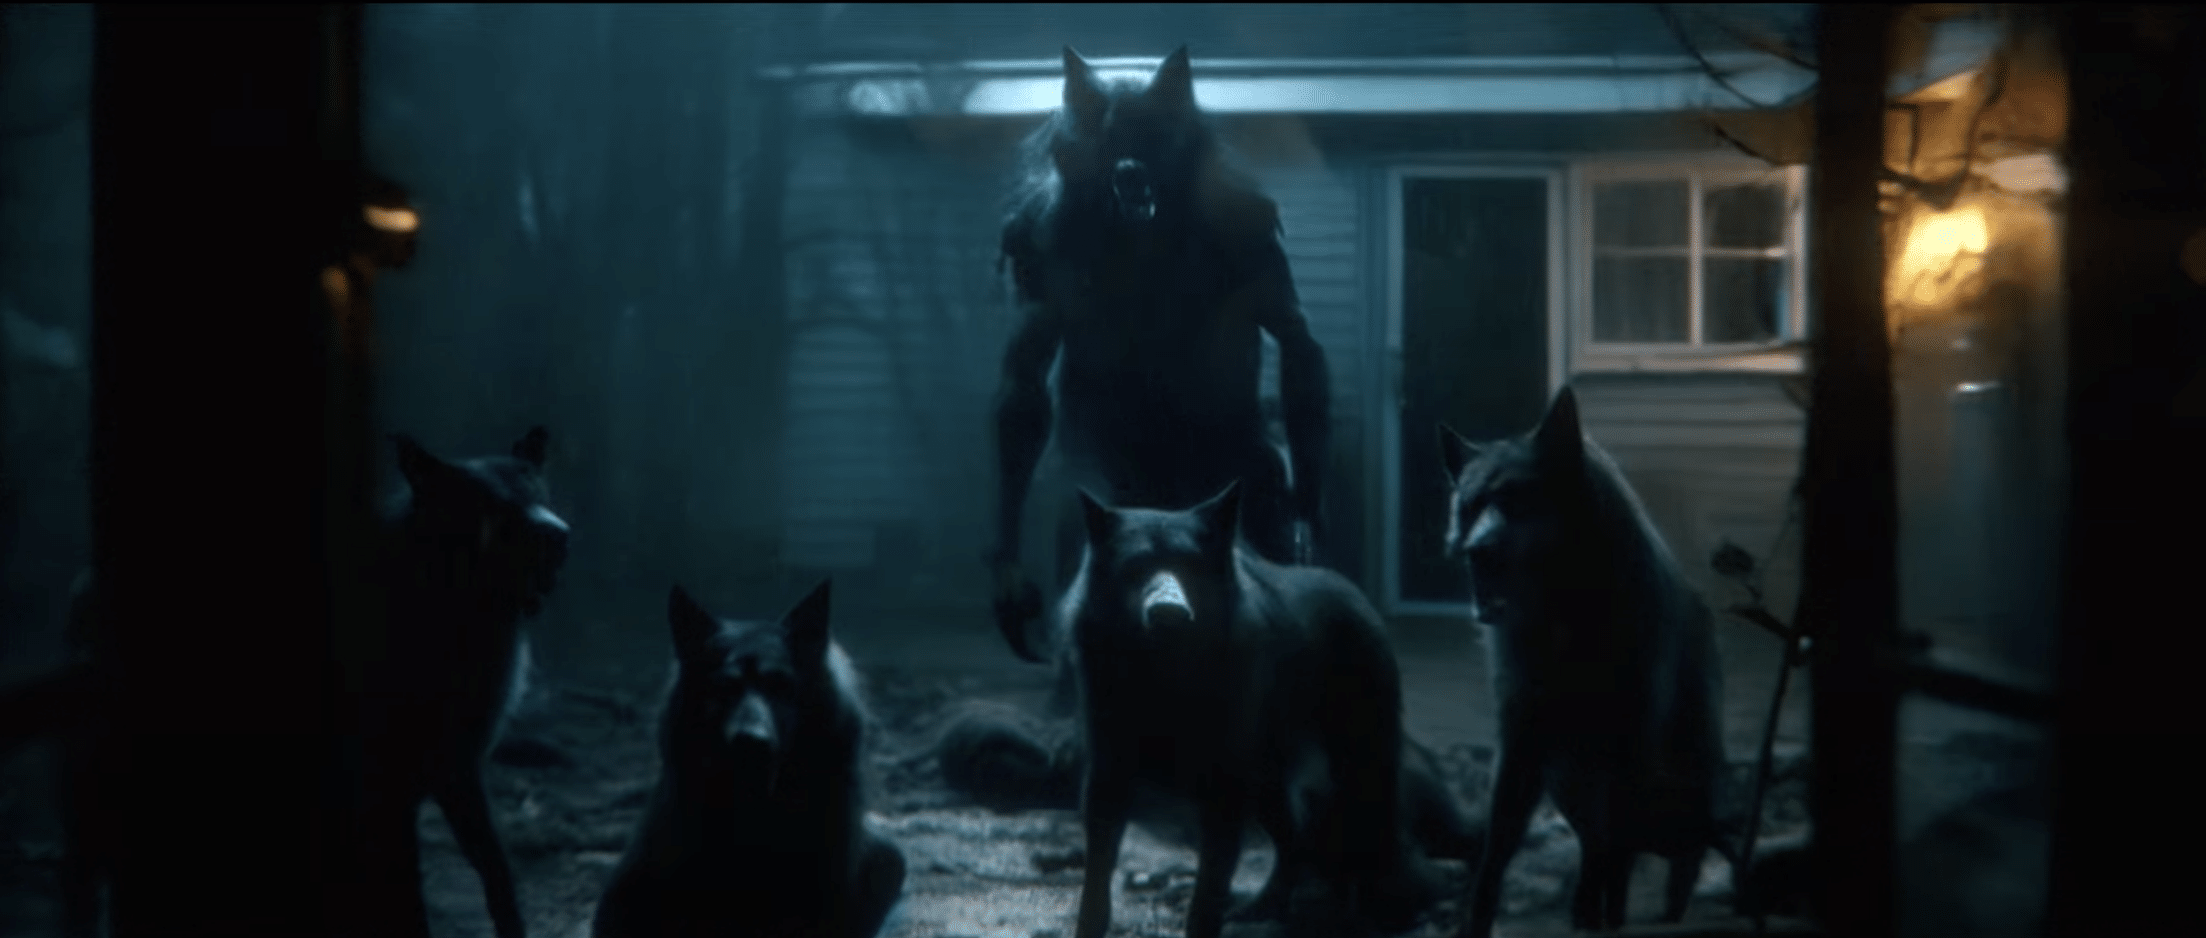 Werewolves Unearthed